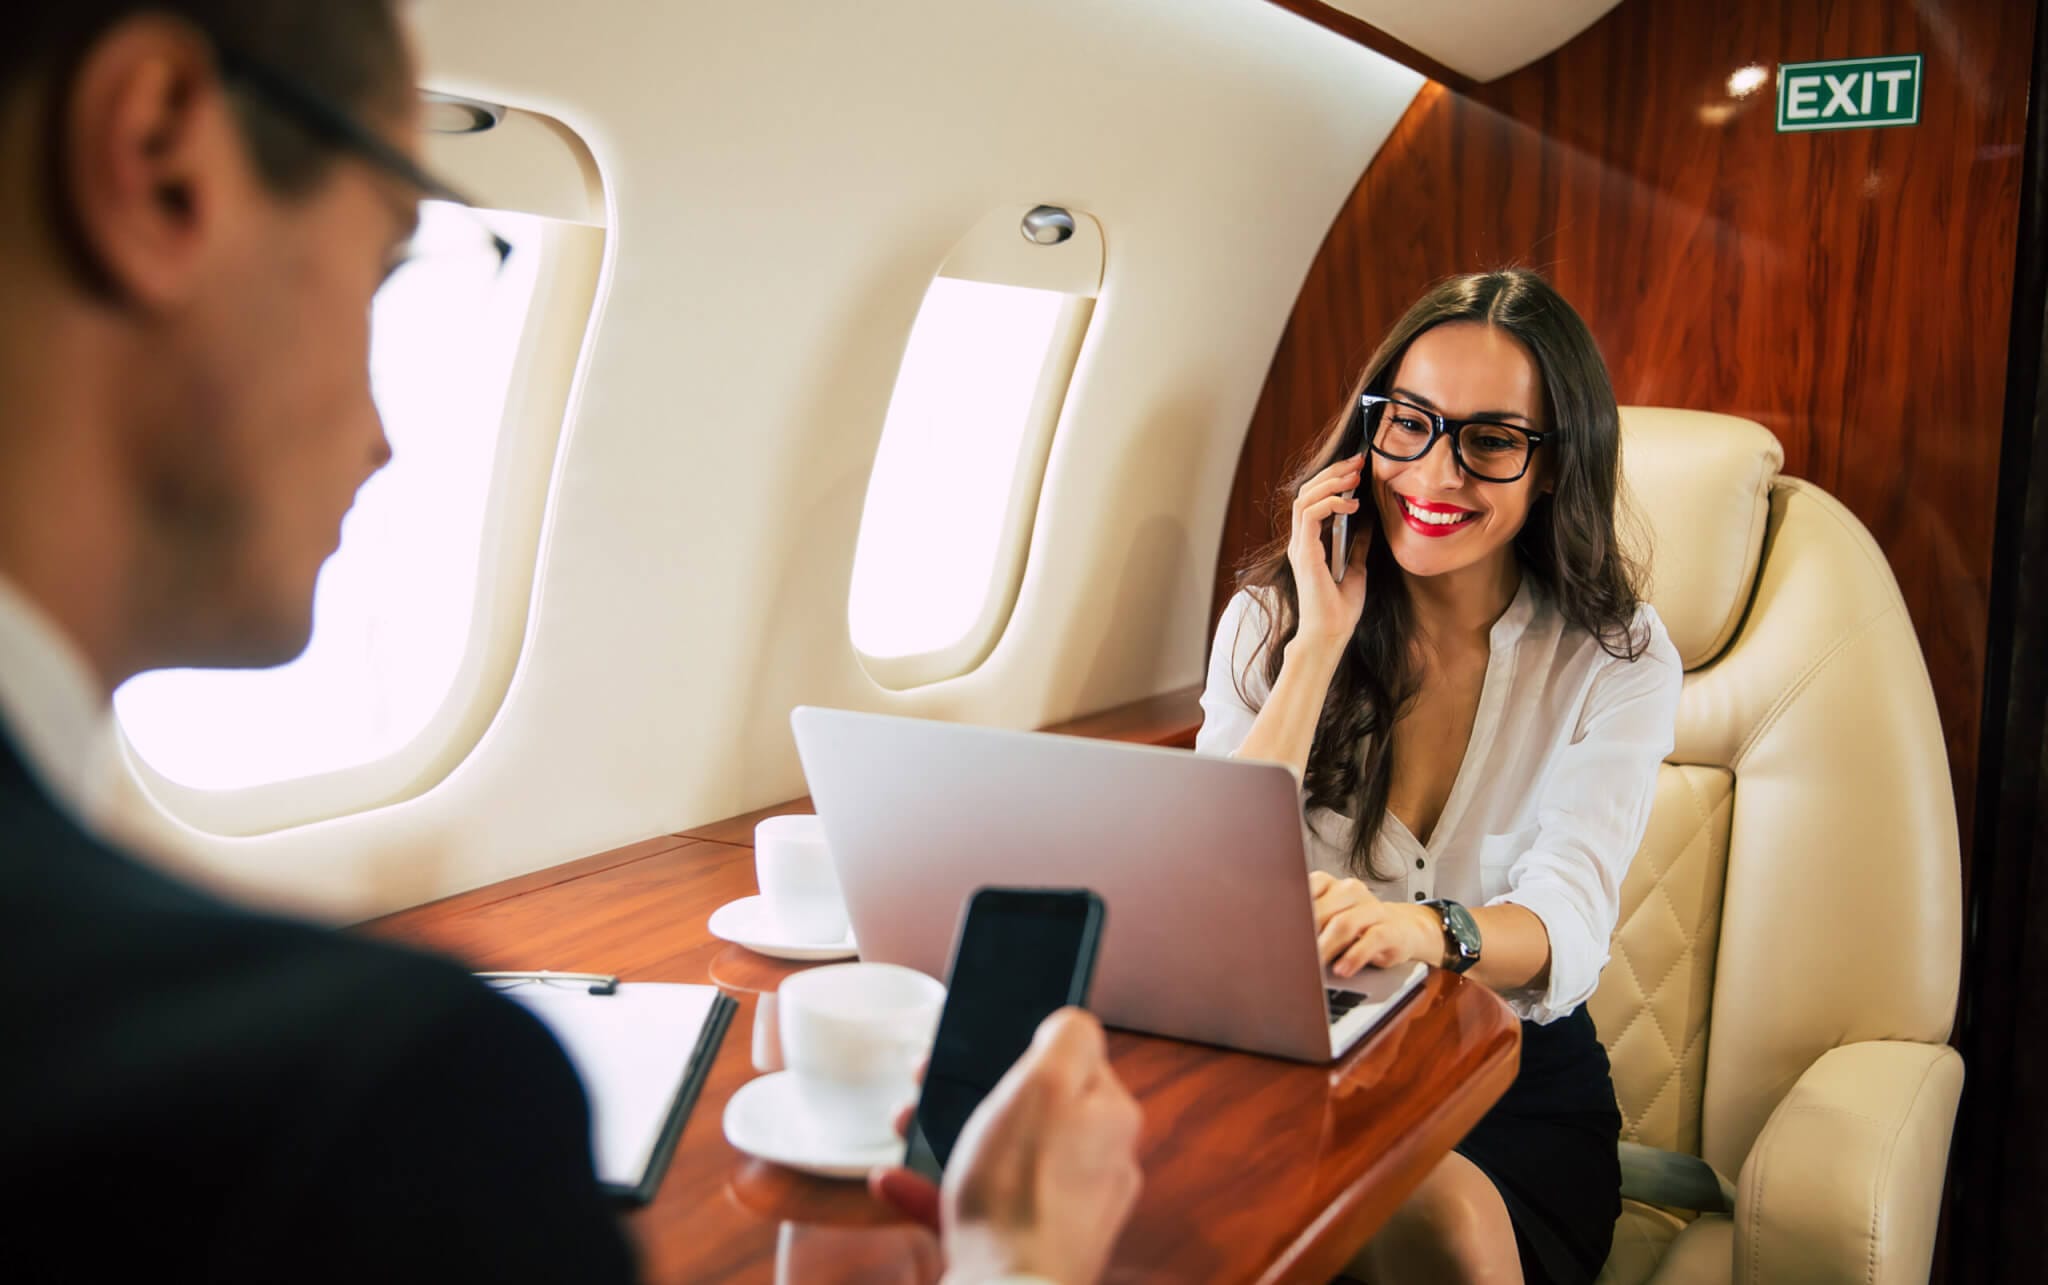 Business personnel aboard private jet